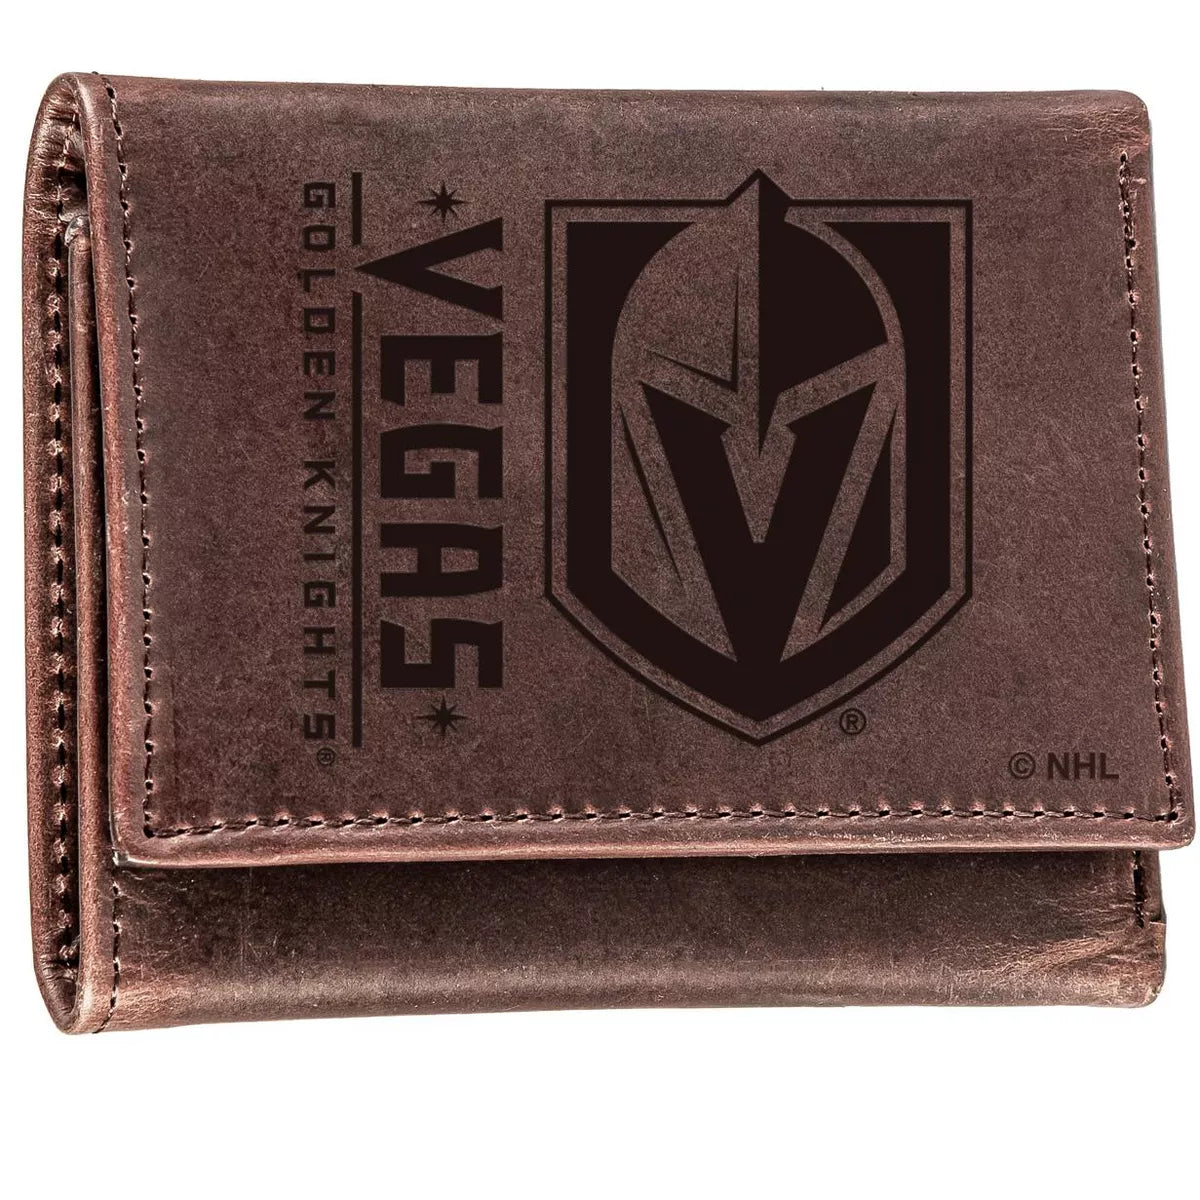 Vegas Golden Knights Brown Leather Trifold Wallet Officially Licensed with Gift Box